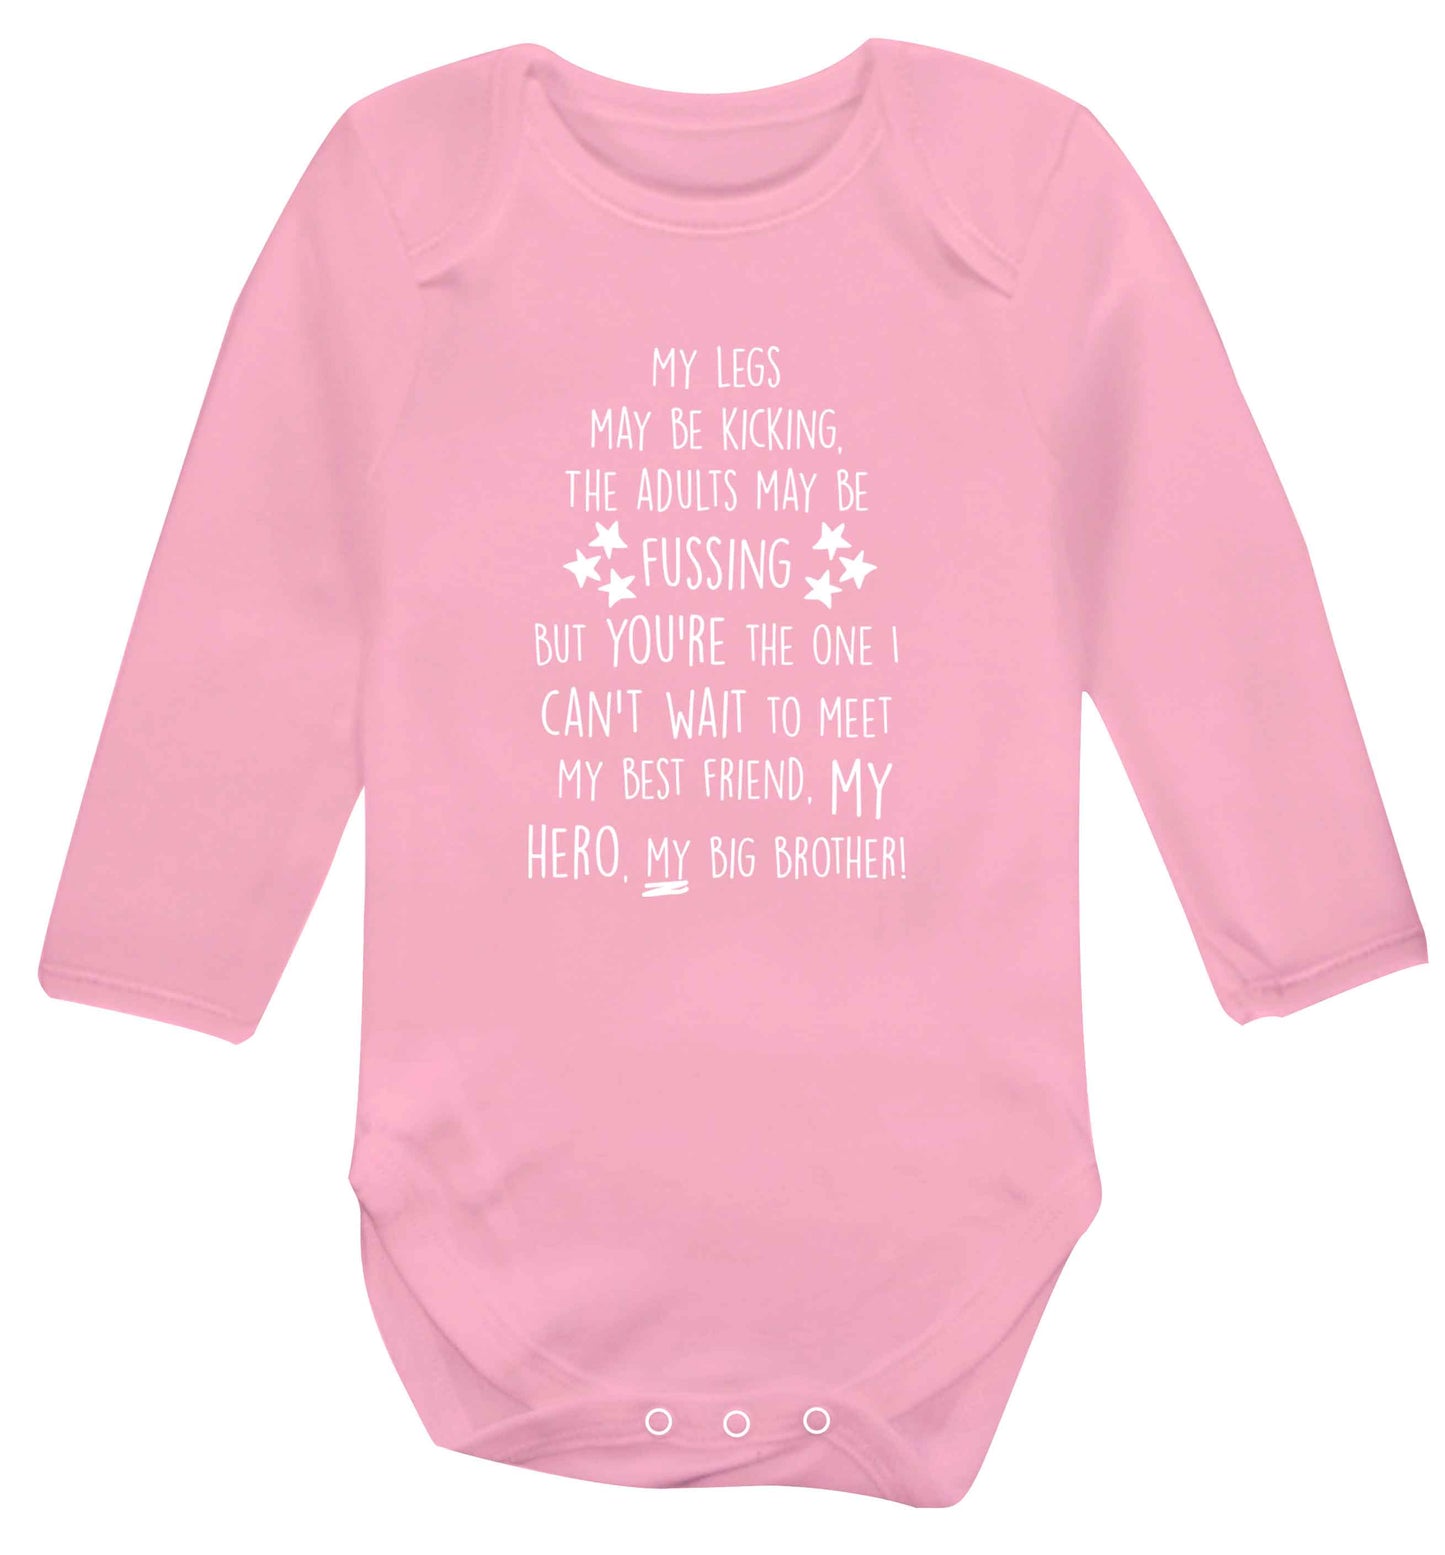 A poem from bump to big brother Baby Vest long sleeved pale pink 6-12 months